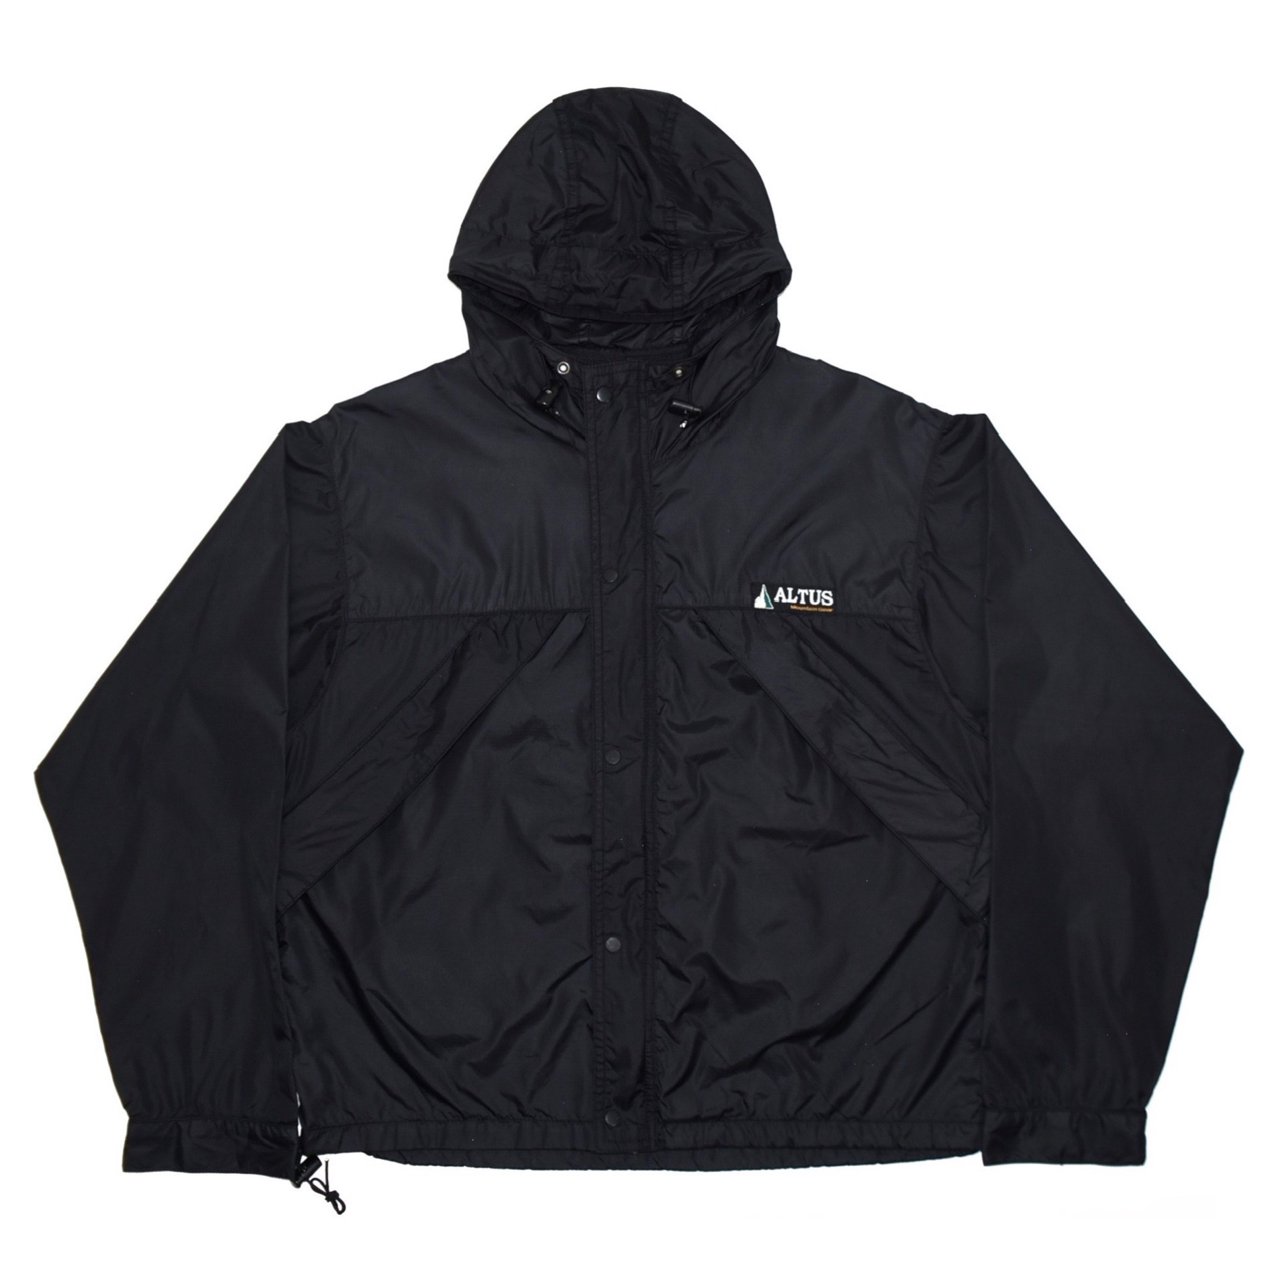 OUTER/アウター - MISSION WEB STORE